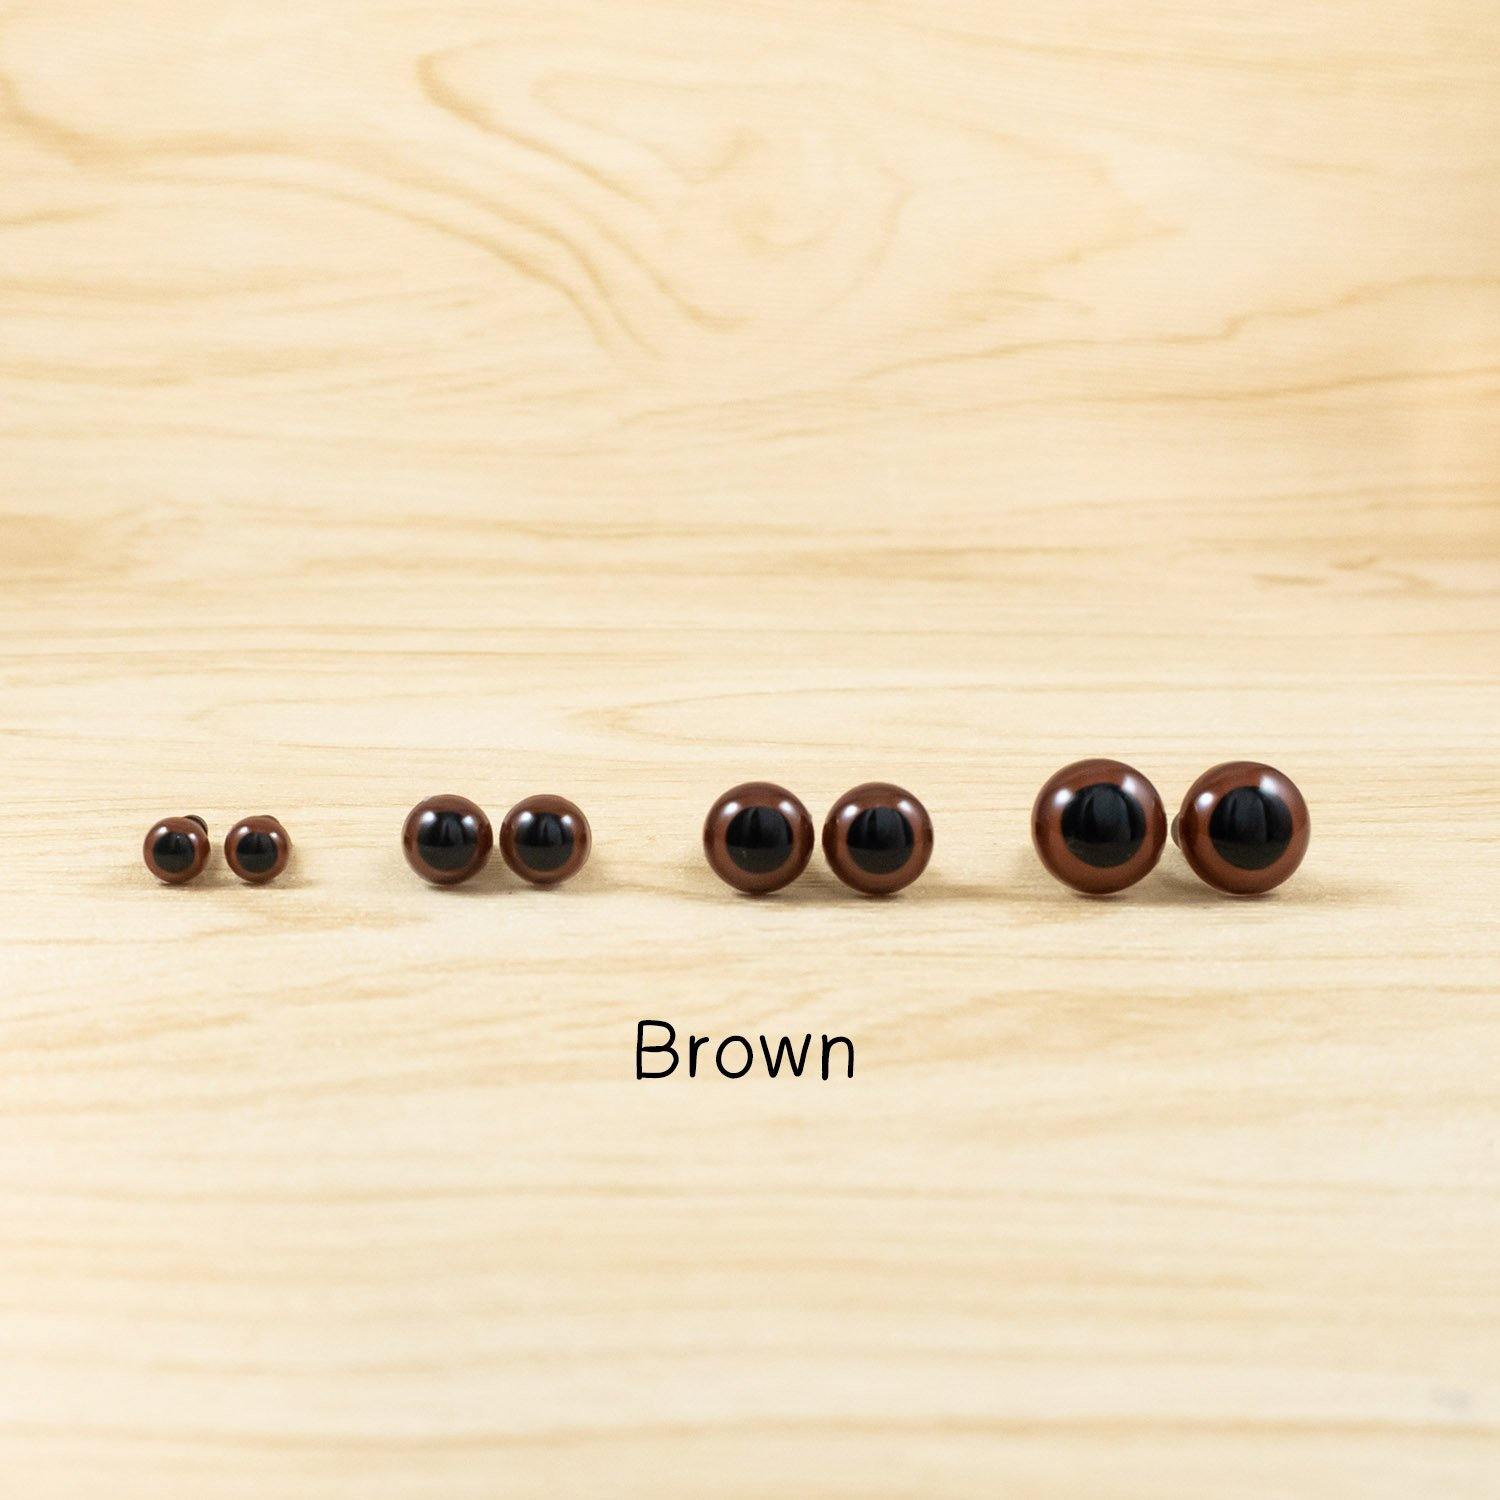 Brown Safety Eyes for teddy bears - 6mm, 8mm, 10mm, 12mm